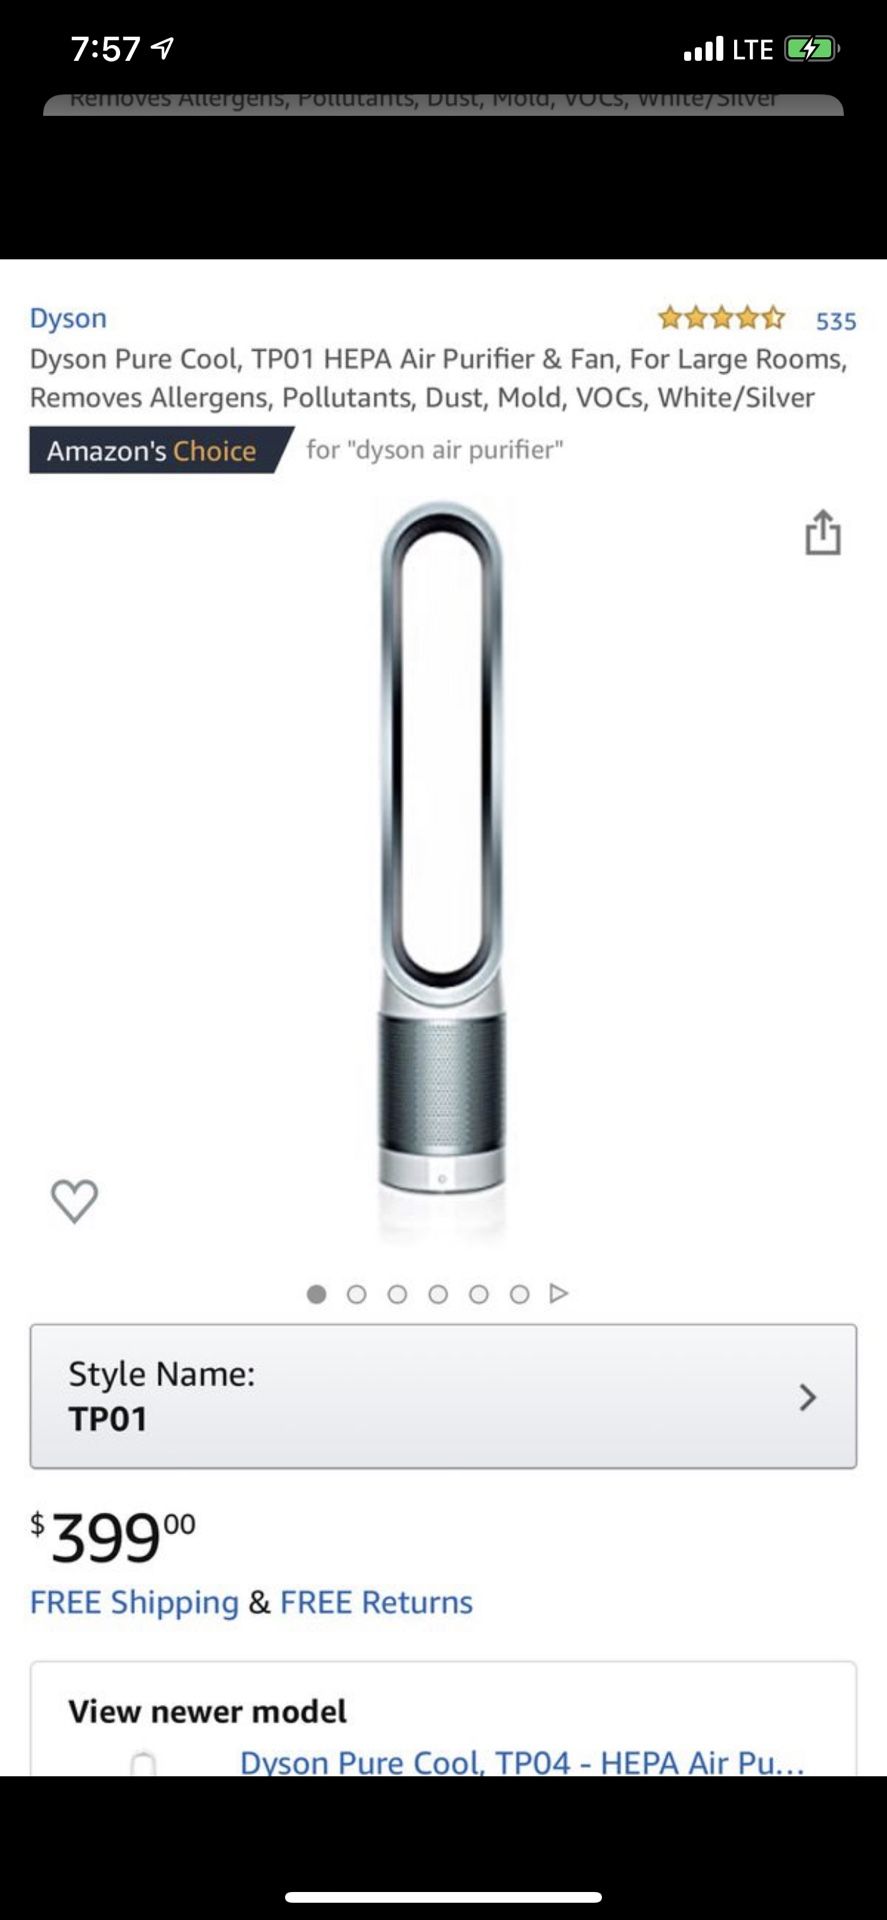 Dyson air purifier and fan